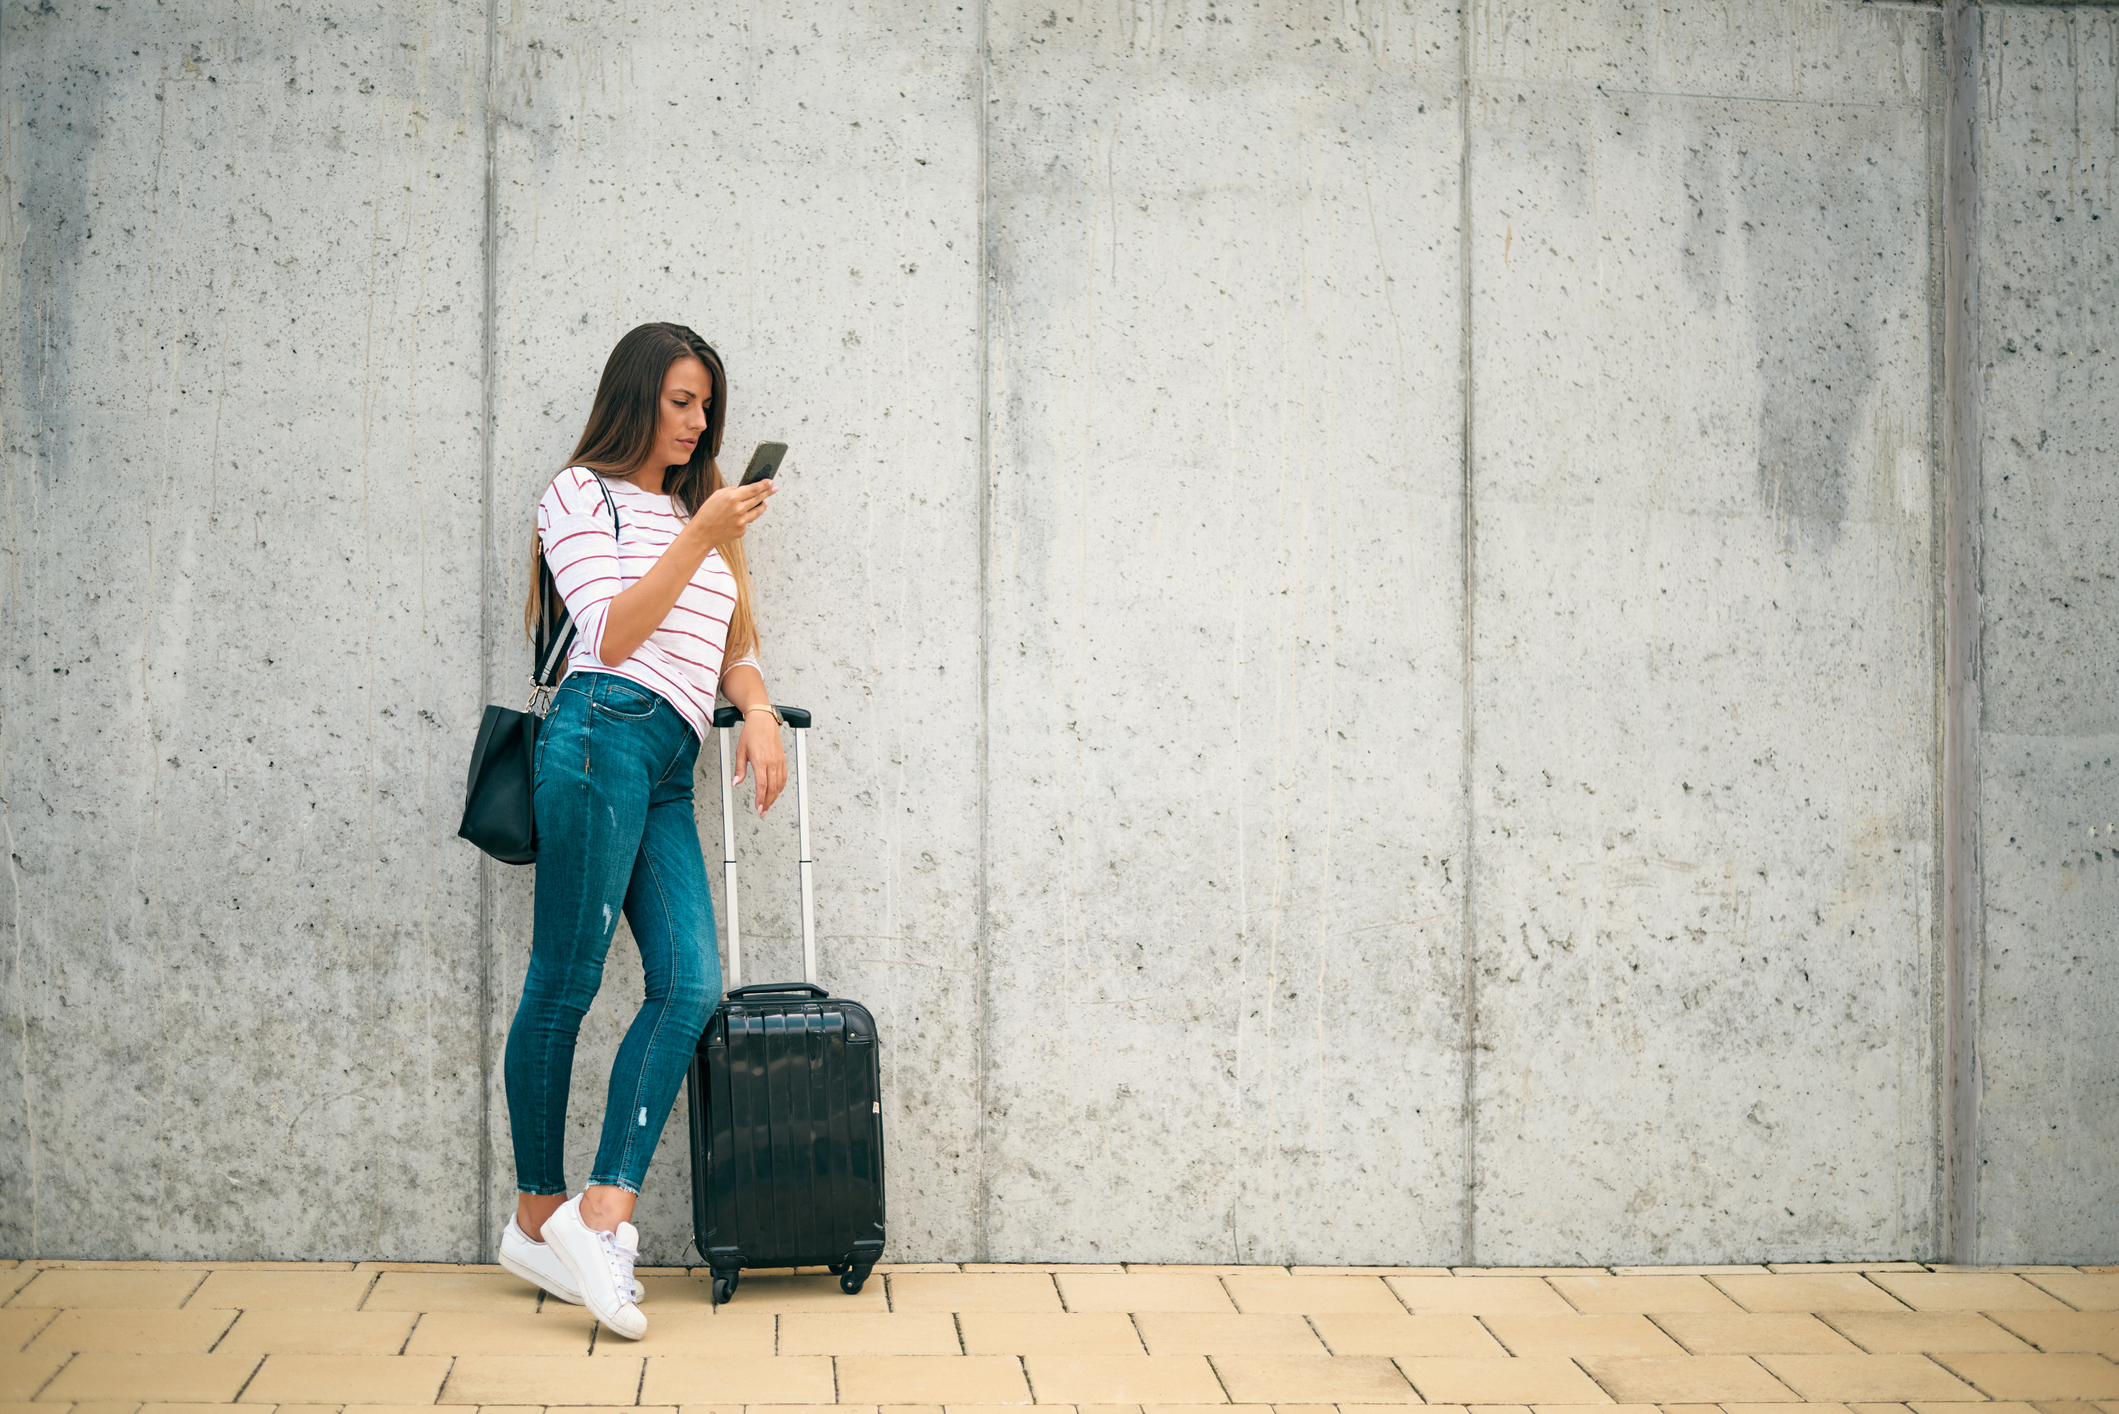 Woman leaning against a wall, looking at phone, with suitcase